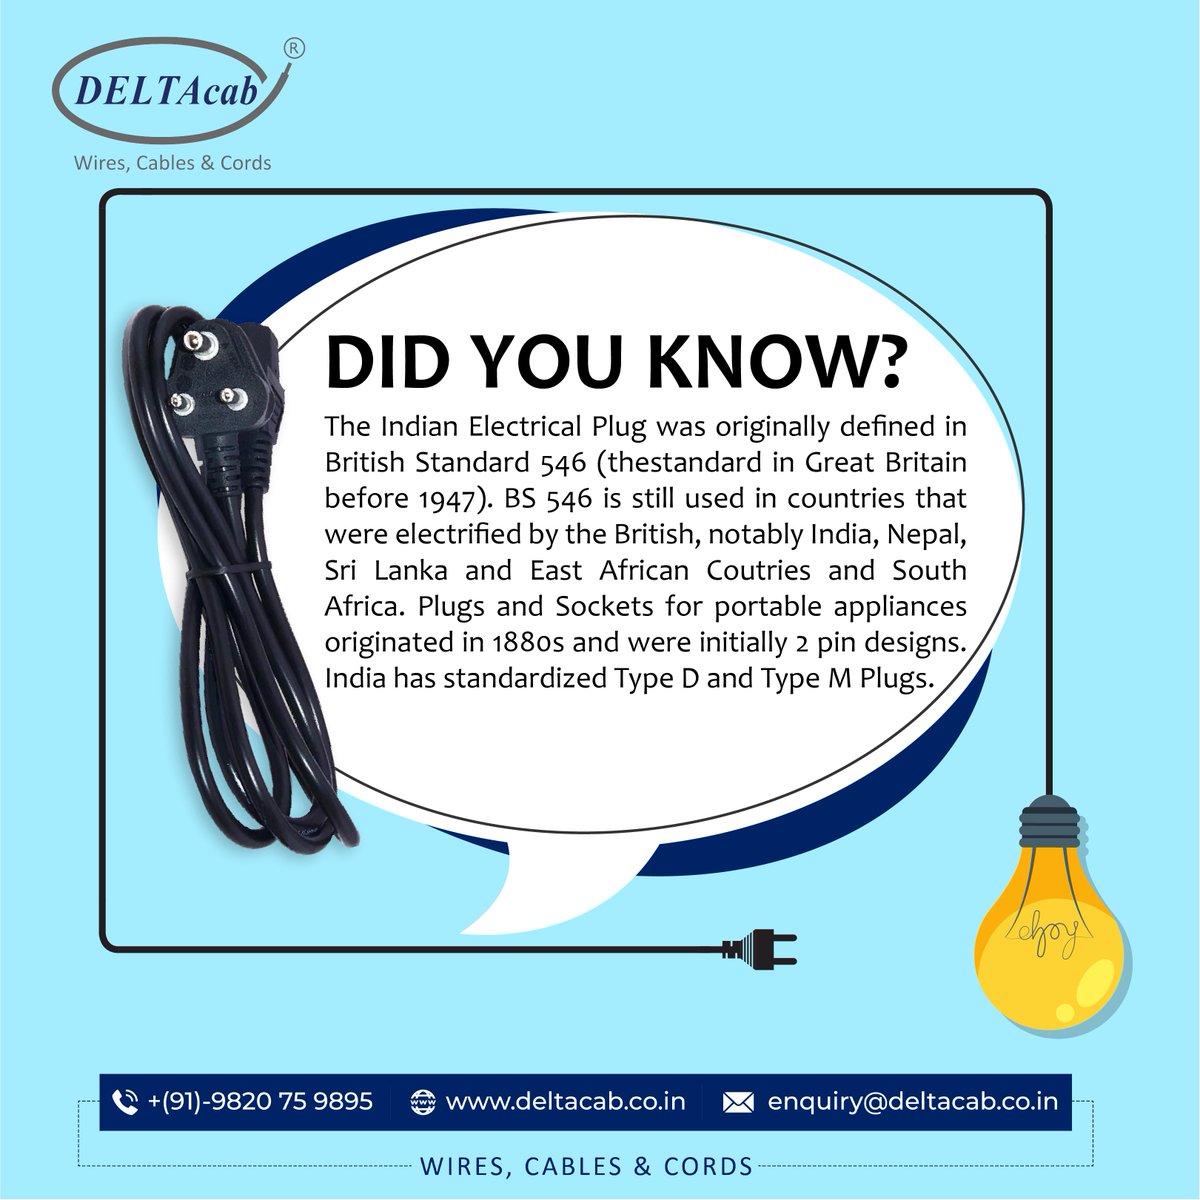 Electrifying Connections: The Remarkable Evolution of Indian Electrical Plugs.

Contact us
Call:- +91-9820759895
Email:- enquiry@deltacab.co.in
Website:- deltacab.co.in

#PlugStandardization #HistoricalConnections #IndianElectrification #Electrify
#cablewires #multicore